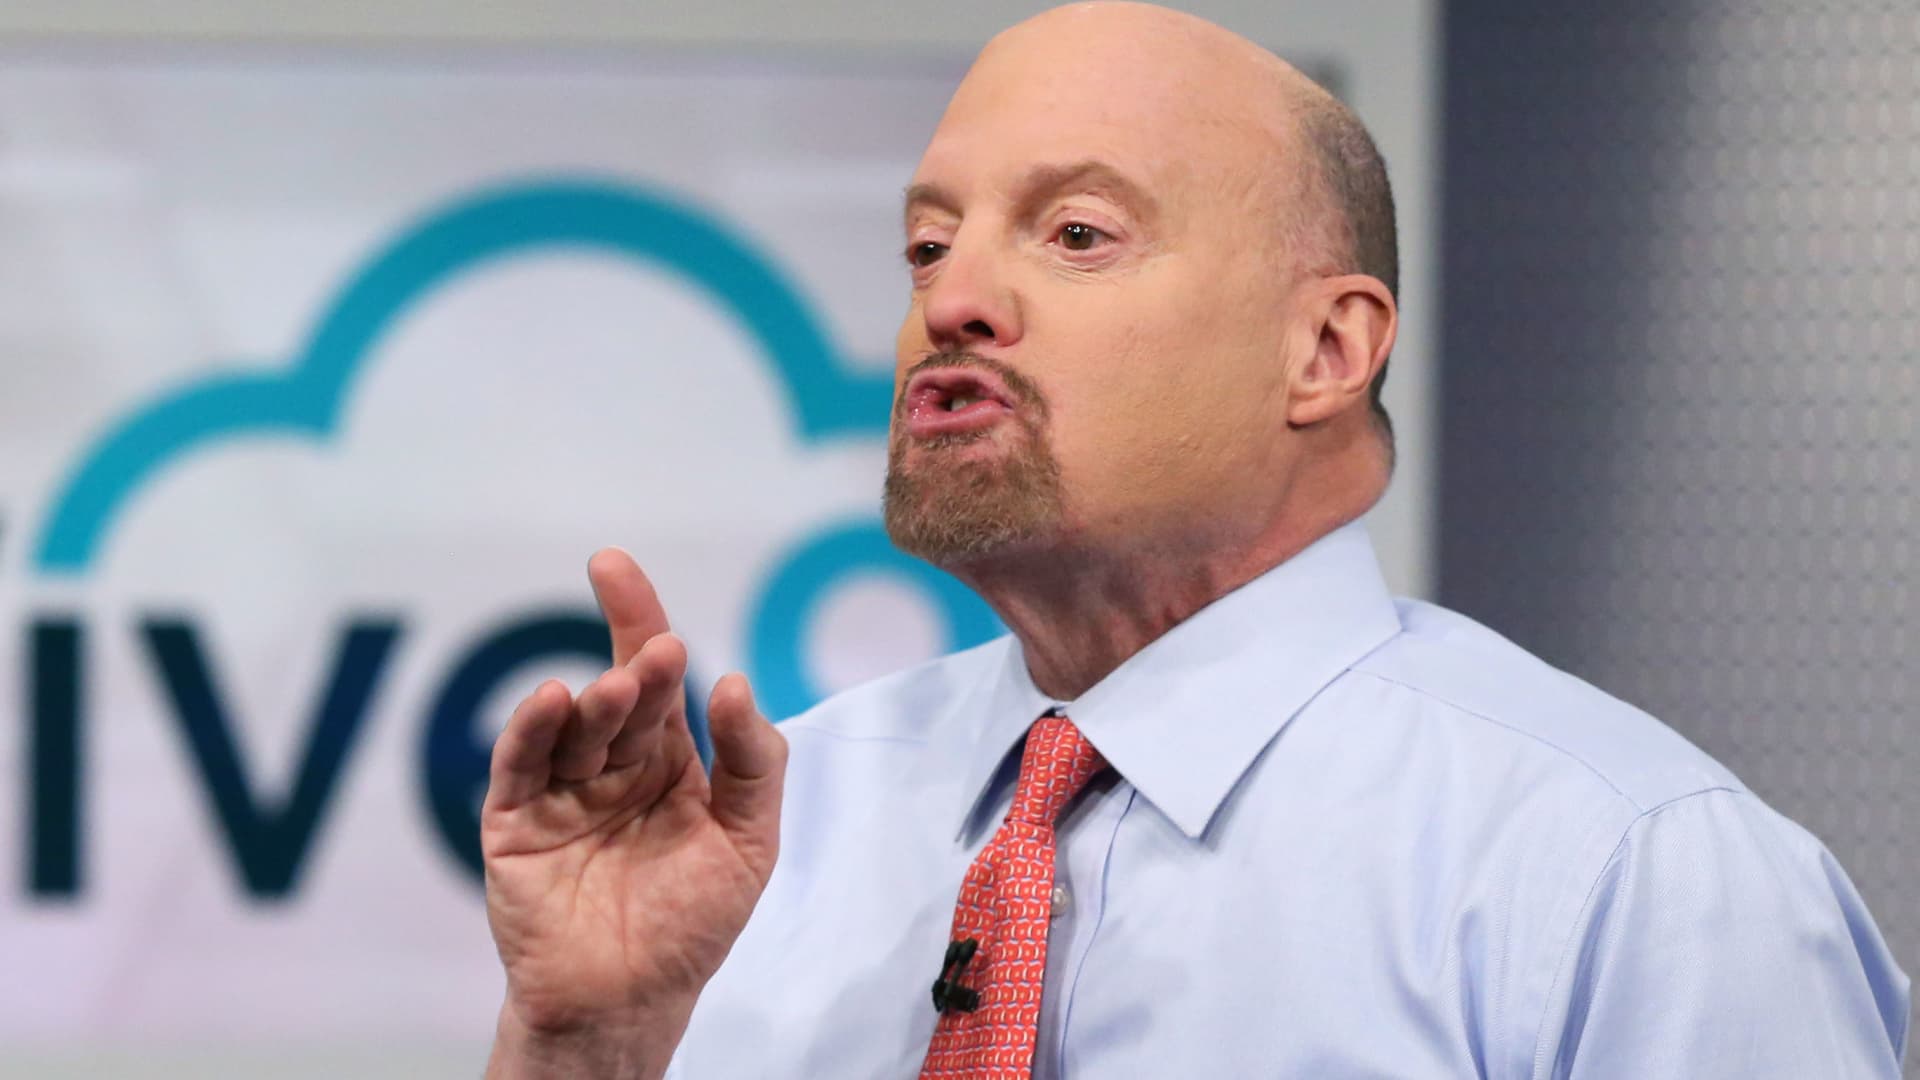 Jim Cramer says investors should take some profits with markets poised to cool off